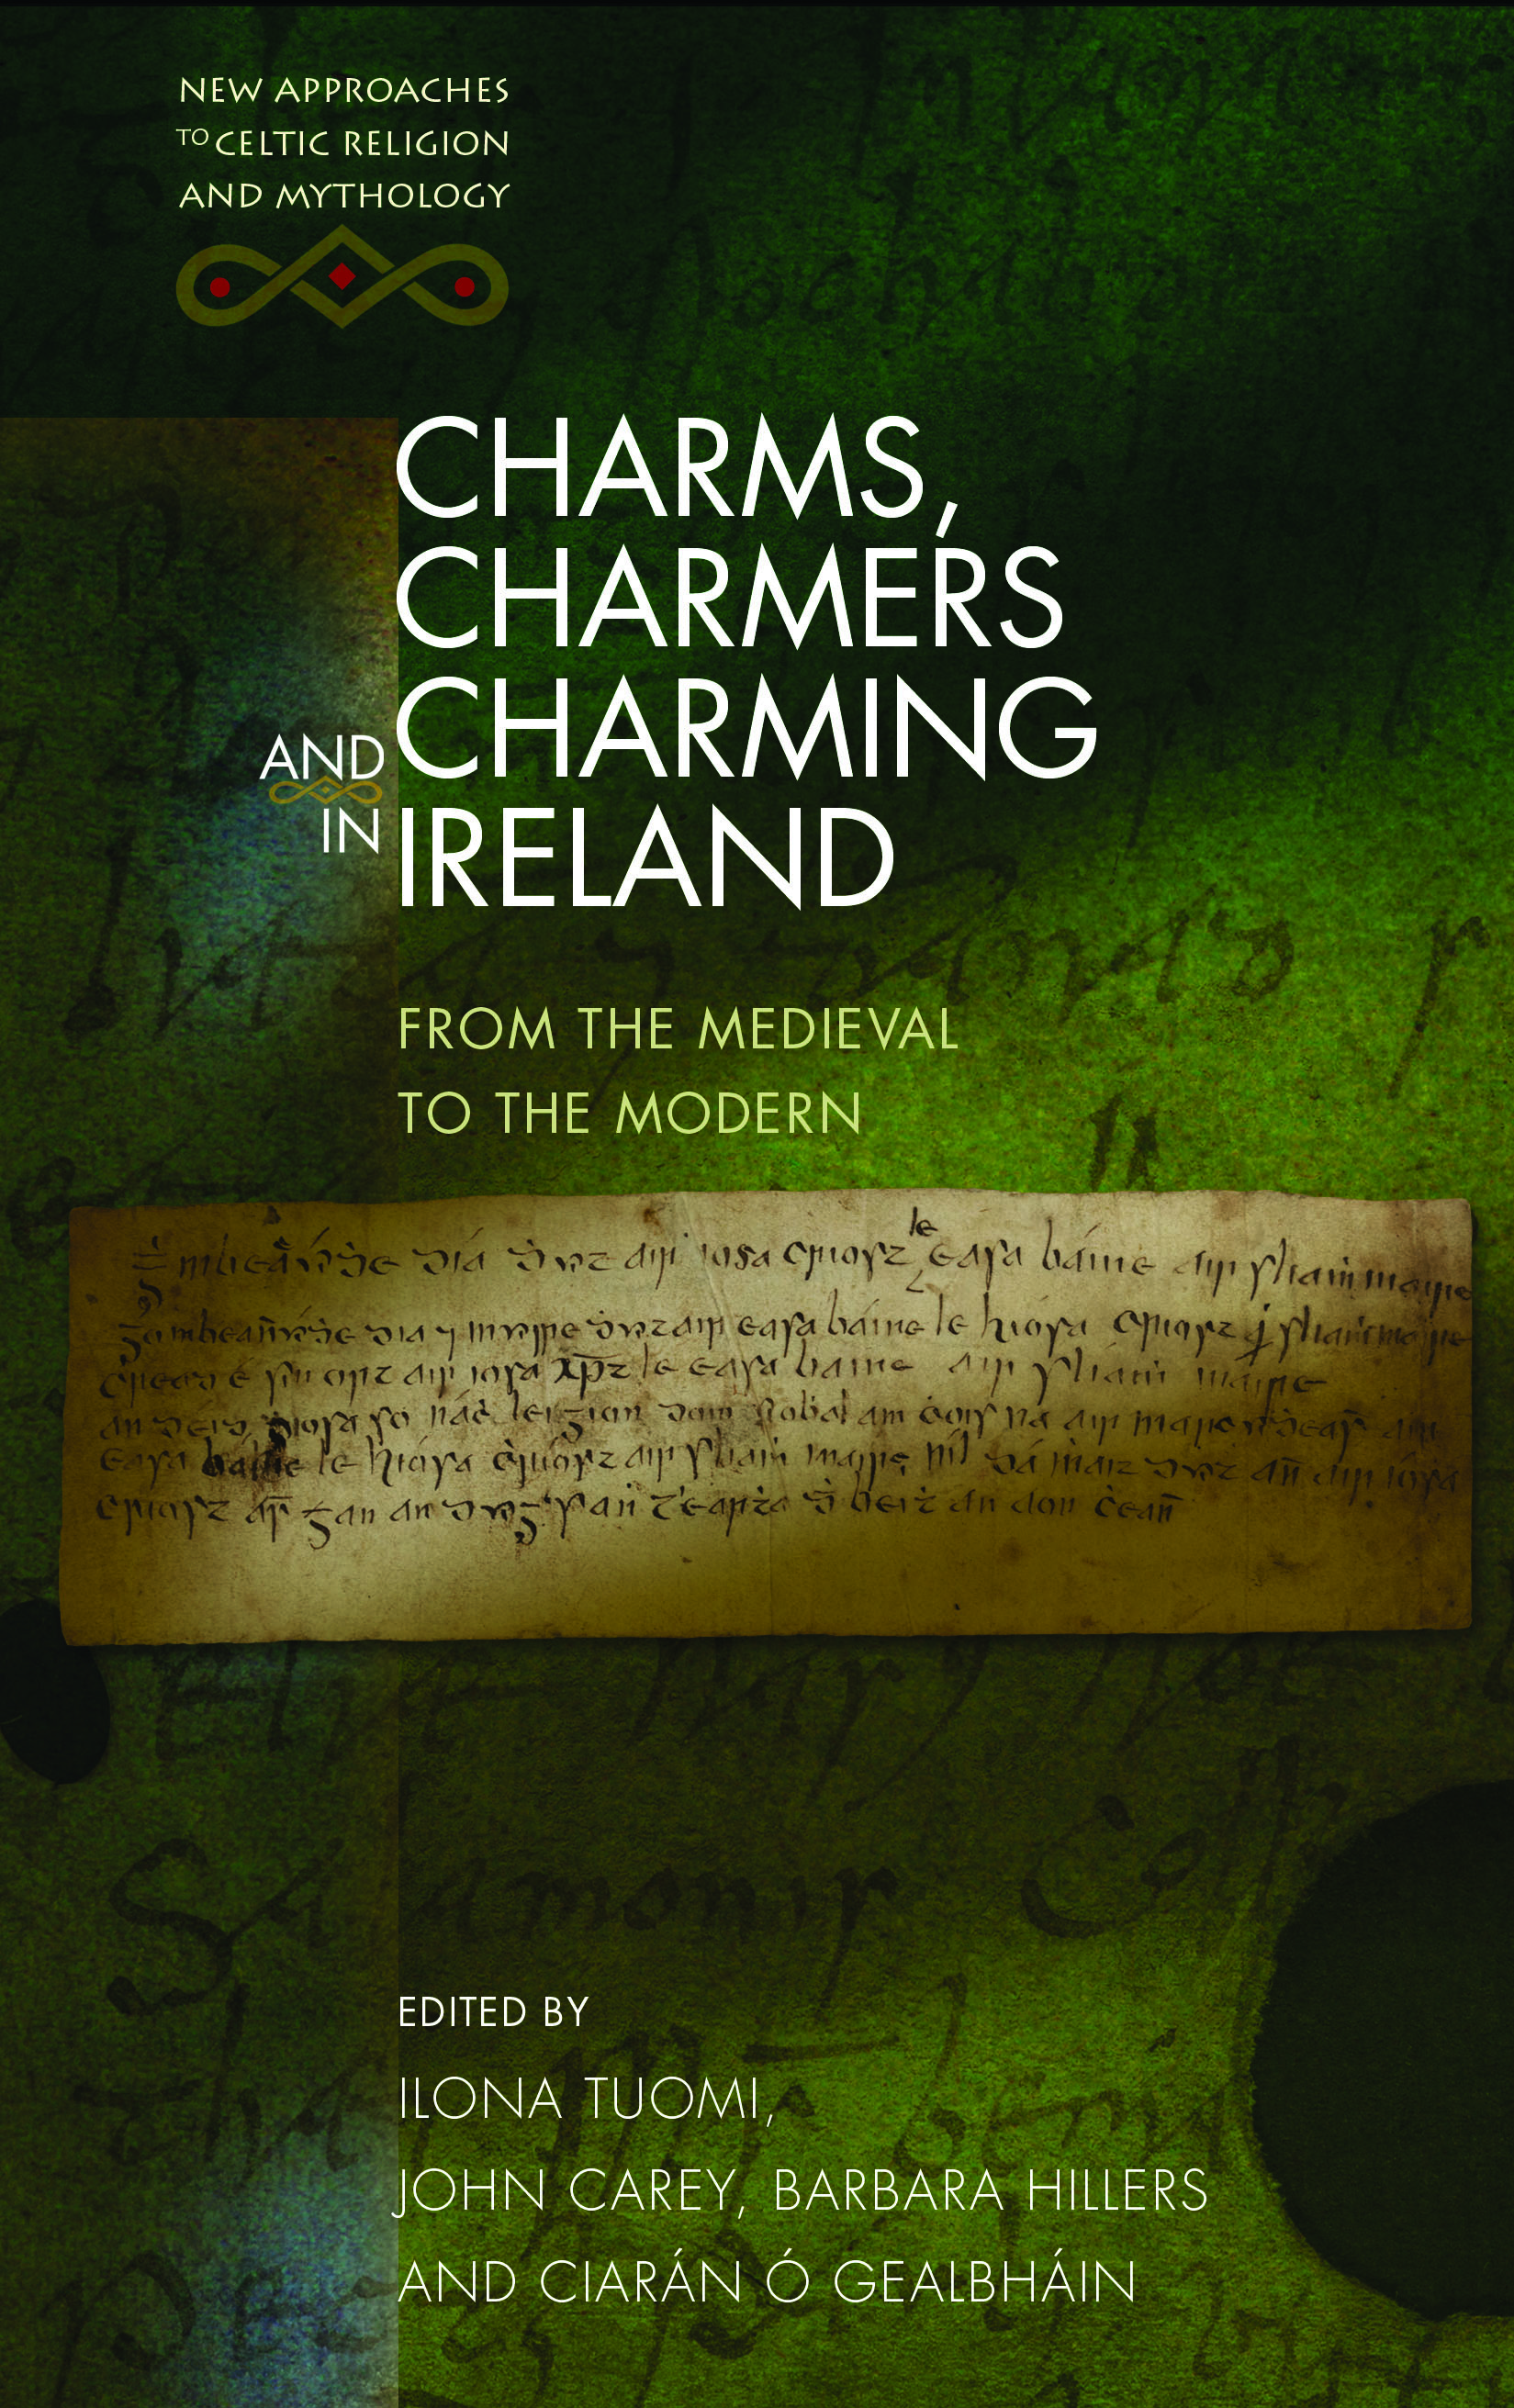 Charms, Charmers & Charming in Ireland